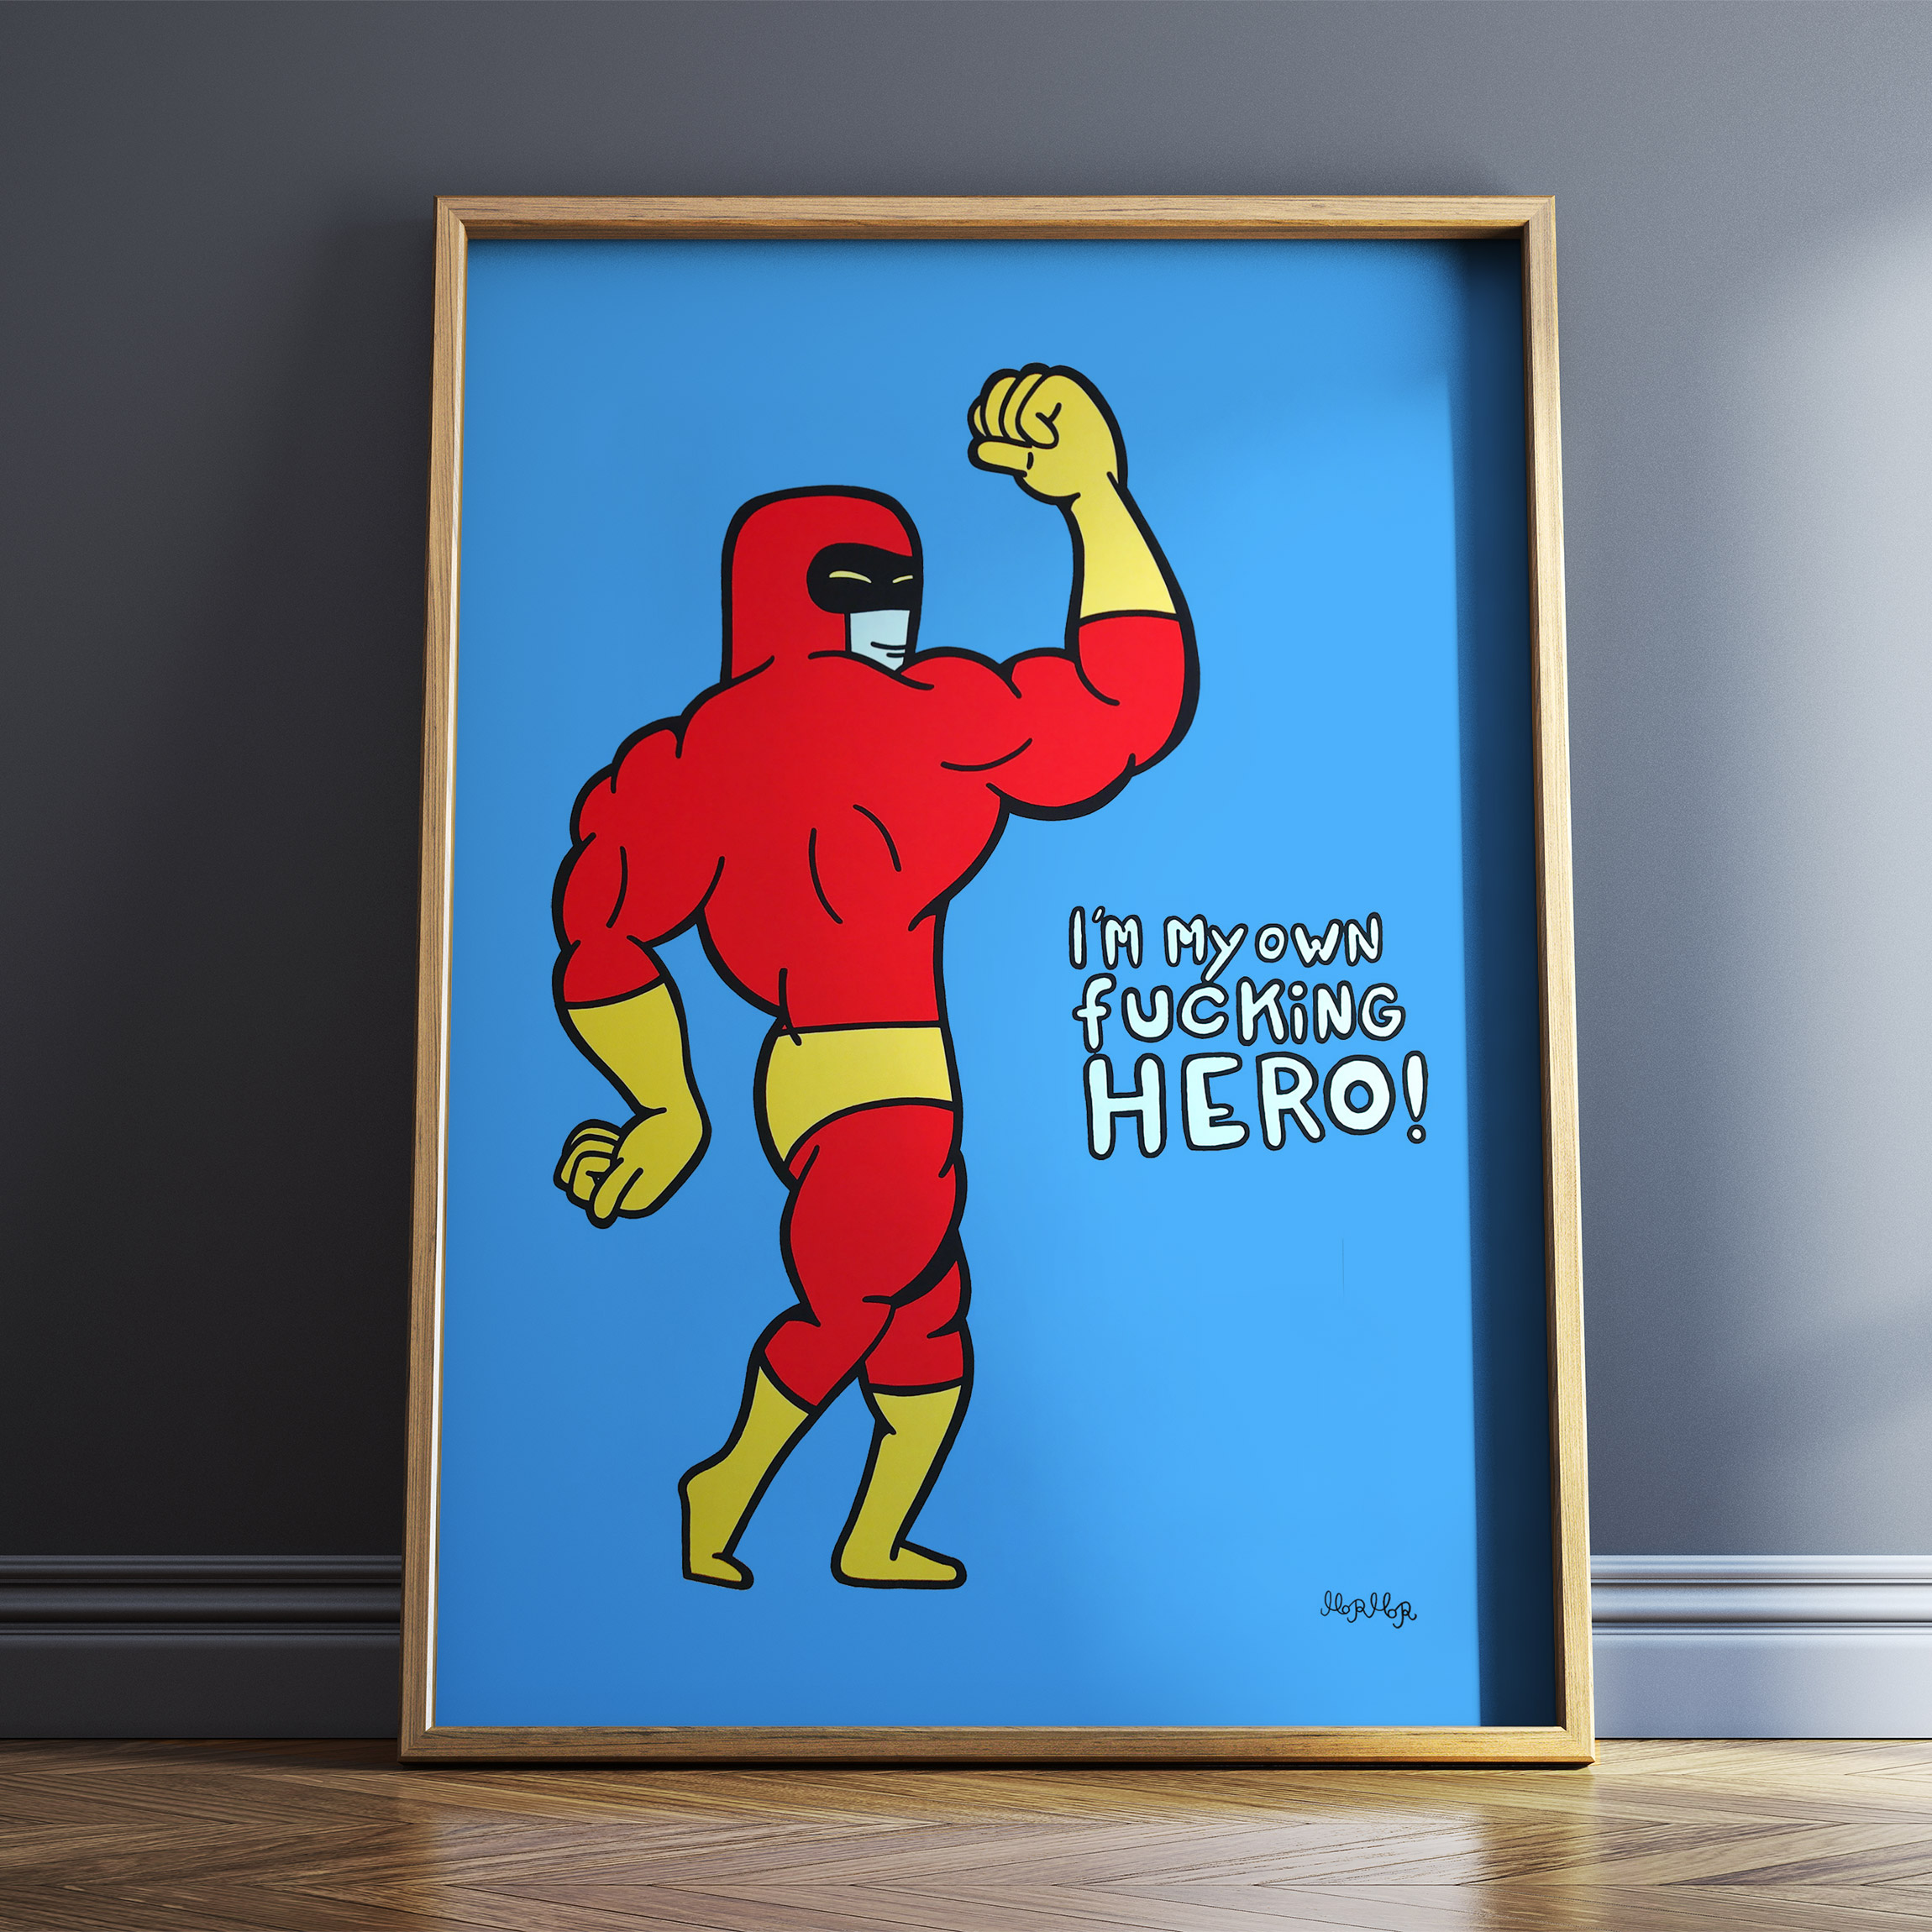 art-prints, giclee, colorful, family-friendly, graphical, pop, bodies, cartoons, blue, red, yellow, ink, paper, amusing, contemporary-art, copenhagen, danish, decorative, design, interior, interior-design, modern, modern-art, nordic, scandinavien, street-art, teenage, Buy original high quality art. Paintings, drawings, limited edition prints & posters by talented artists.